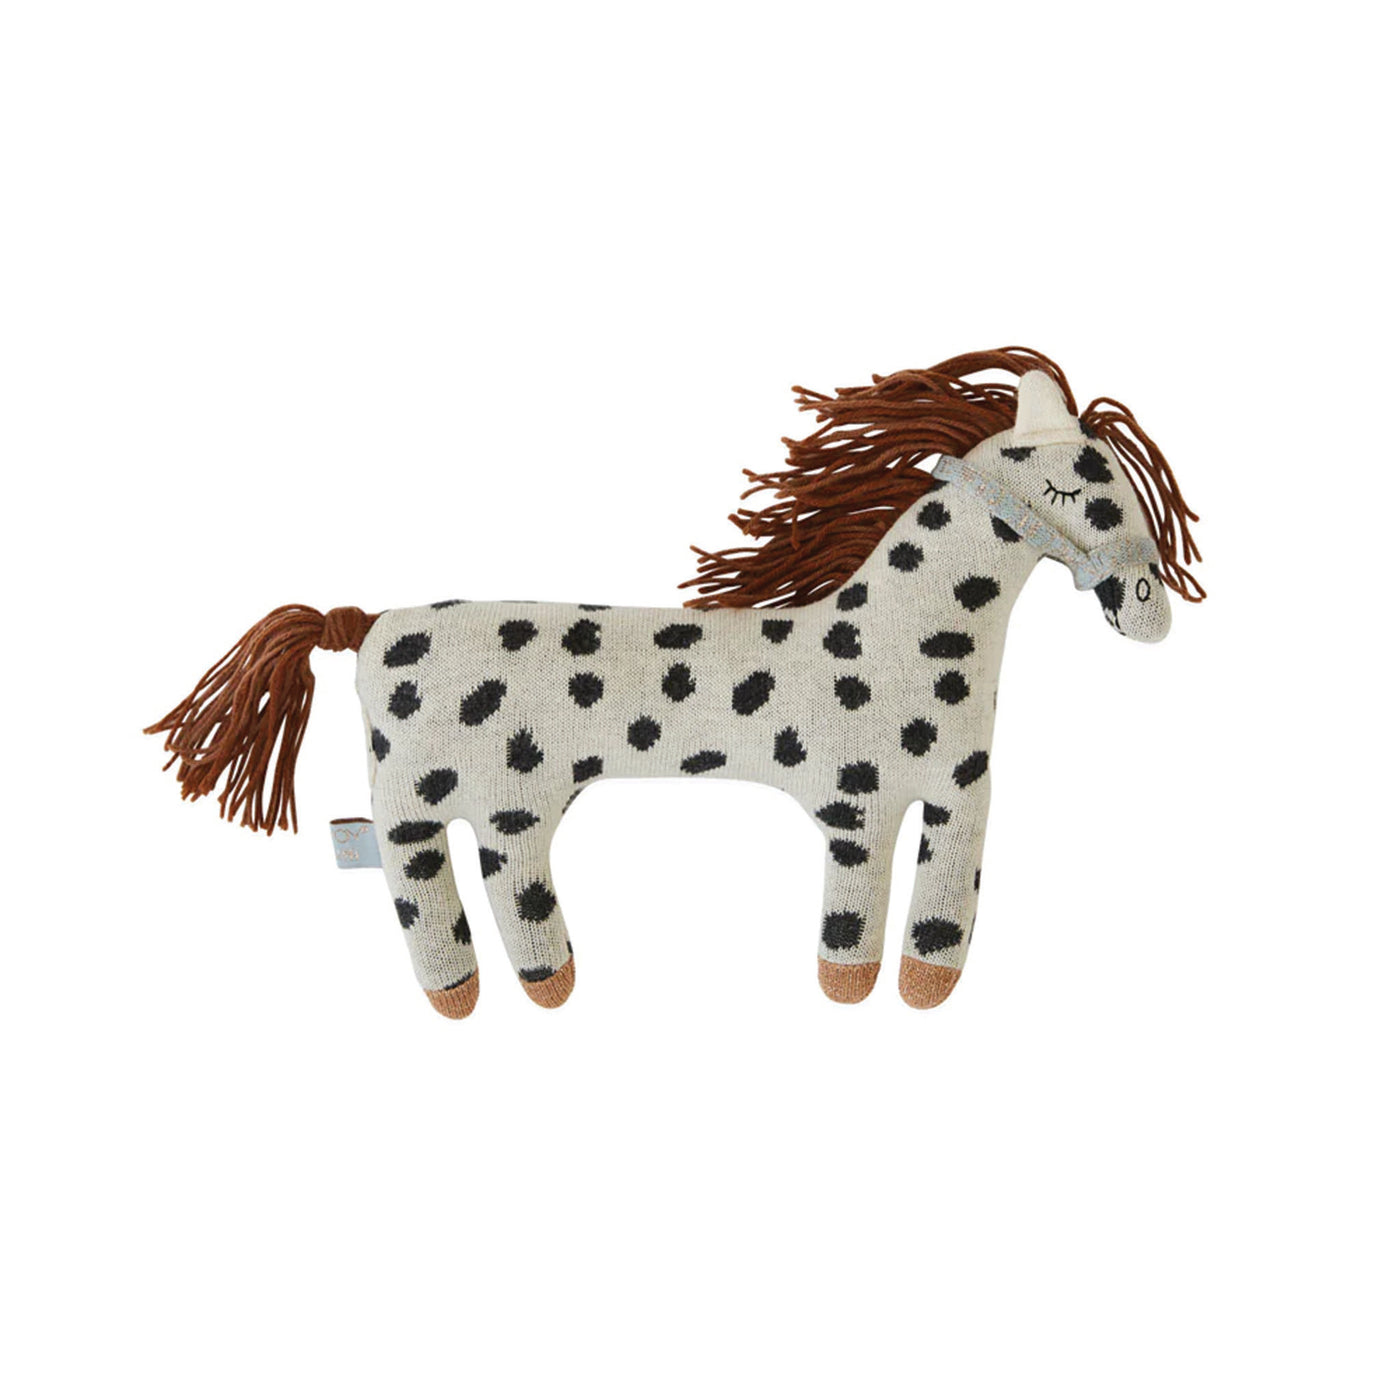  Little Pelle Pony made by Oyoy on a white background